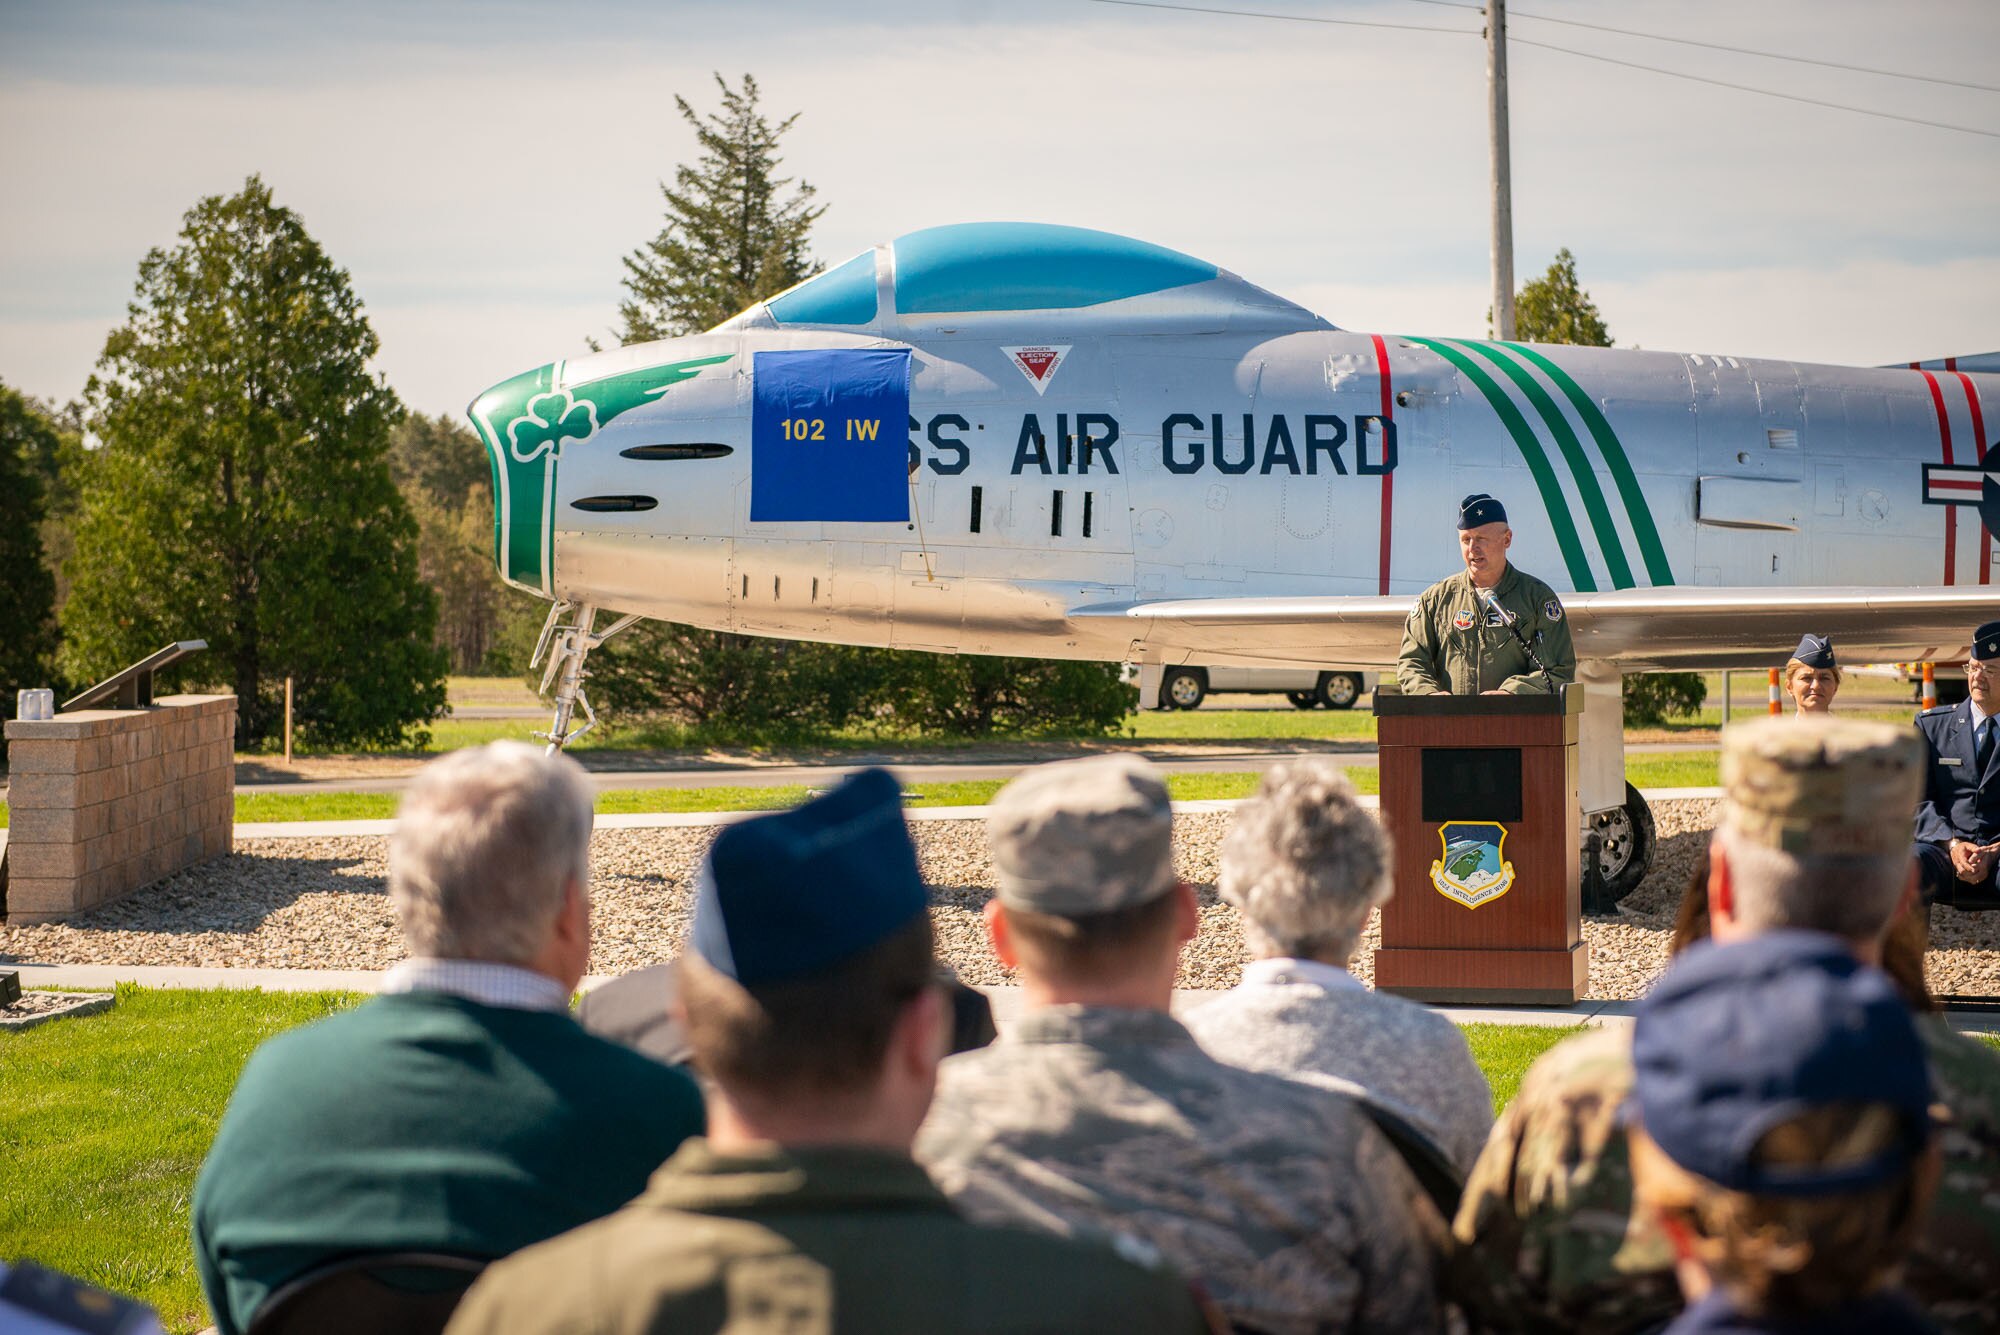 A North American F-86H Sabre static display was dedicated during a ceremony at Otis Air National Guard Base, Mass. on June 8. The ceremony was held to formally announce the dedication of tail number 31235 in honor of Captain Russell “Rusty” L. Schweickart, who was in attendance. Schweickart flew the F-86H Sabre during the early 1960’s while assigned to the 101st Tactical Fighter Squadron, and later served as lunar module pilot for Apollo 9, March 3-13, 1969.